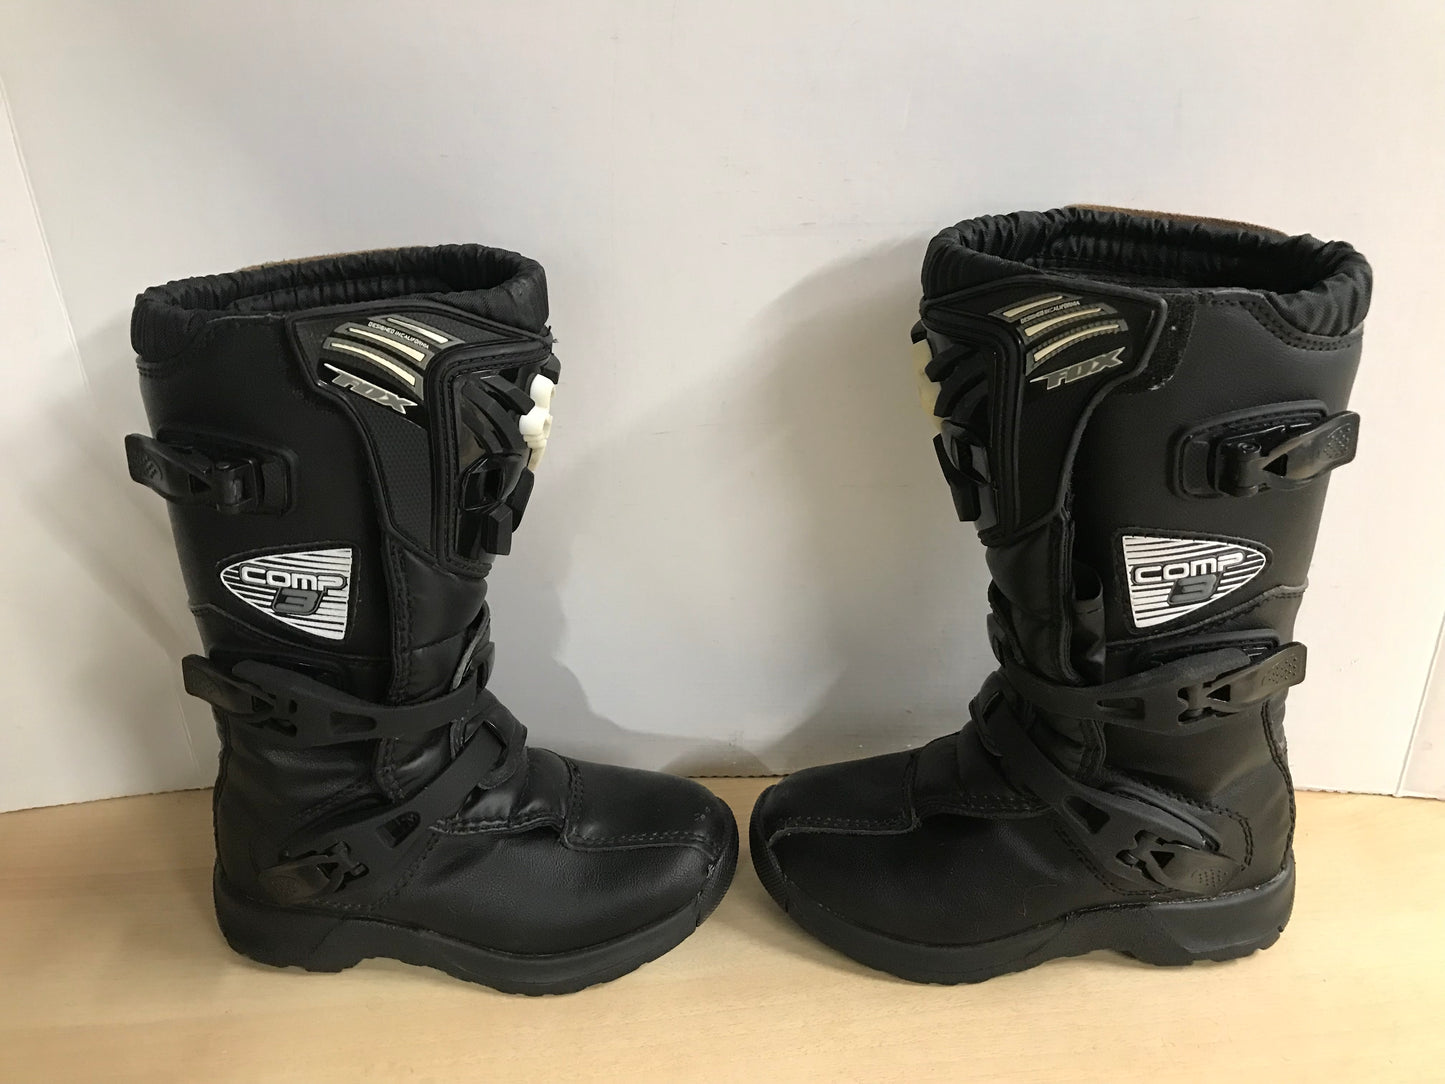 Motocross BMX Dirt Bike Bike Boots Fox Child Size 1 Black Excellent Top Buckle On Both  Removed For Velcro Only